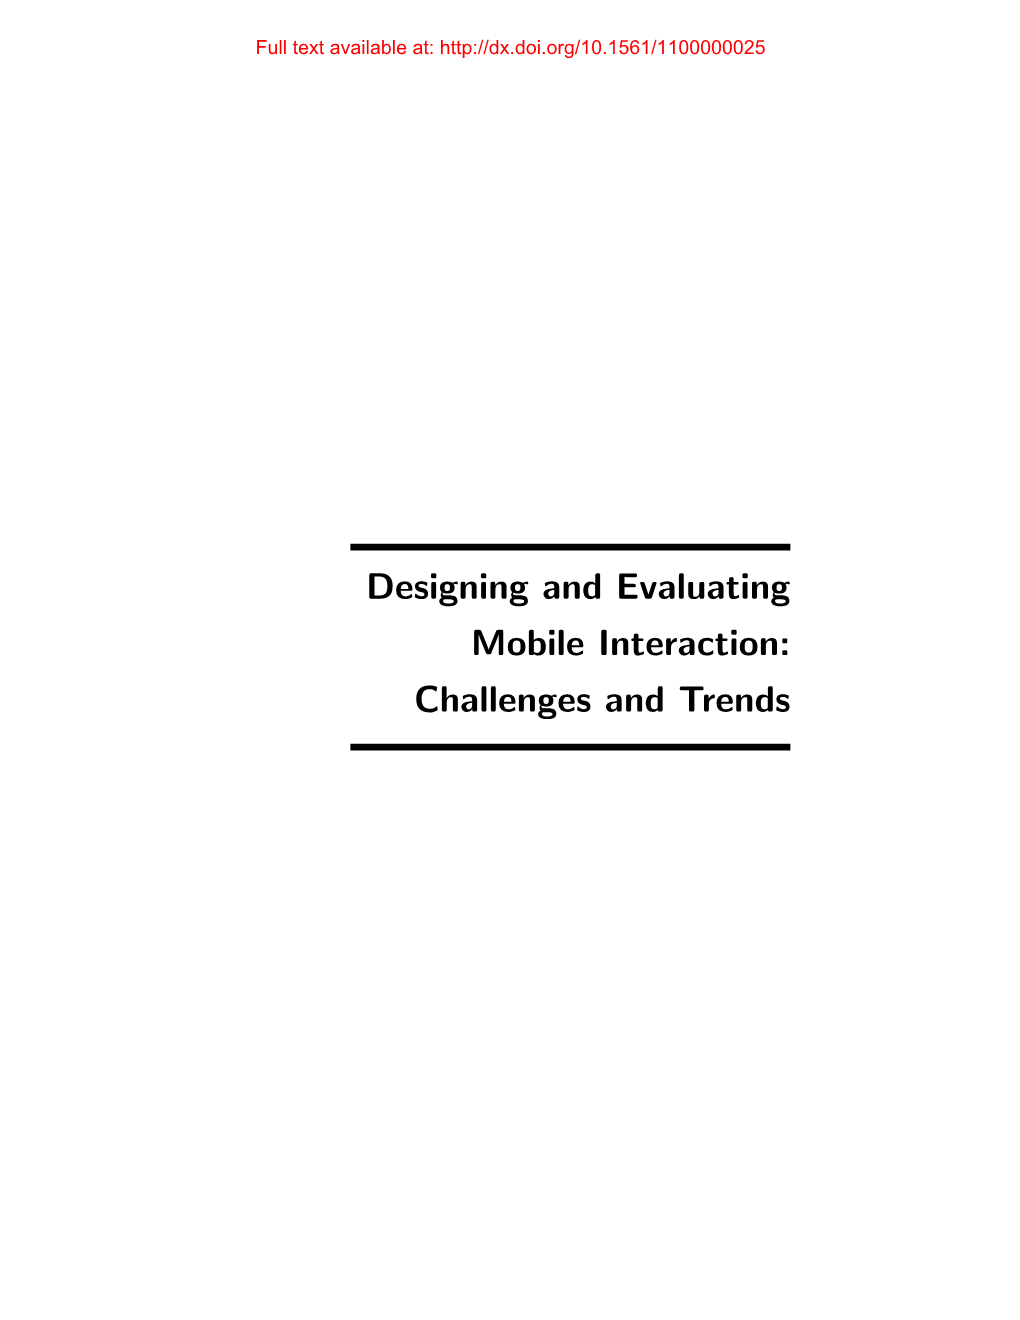 Designing and Evaluating Mobile Interaction: Challenges and Trends Full Text Available At